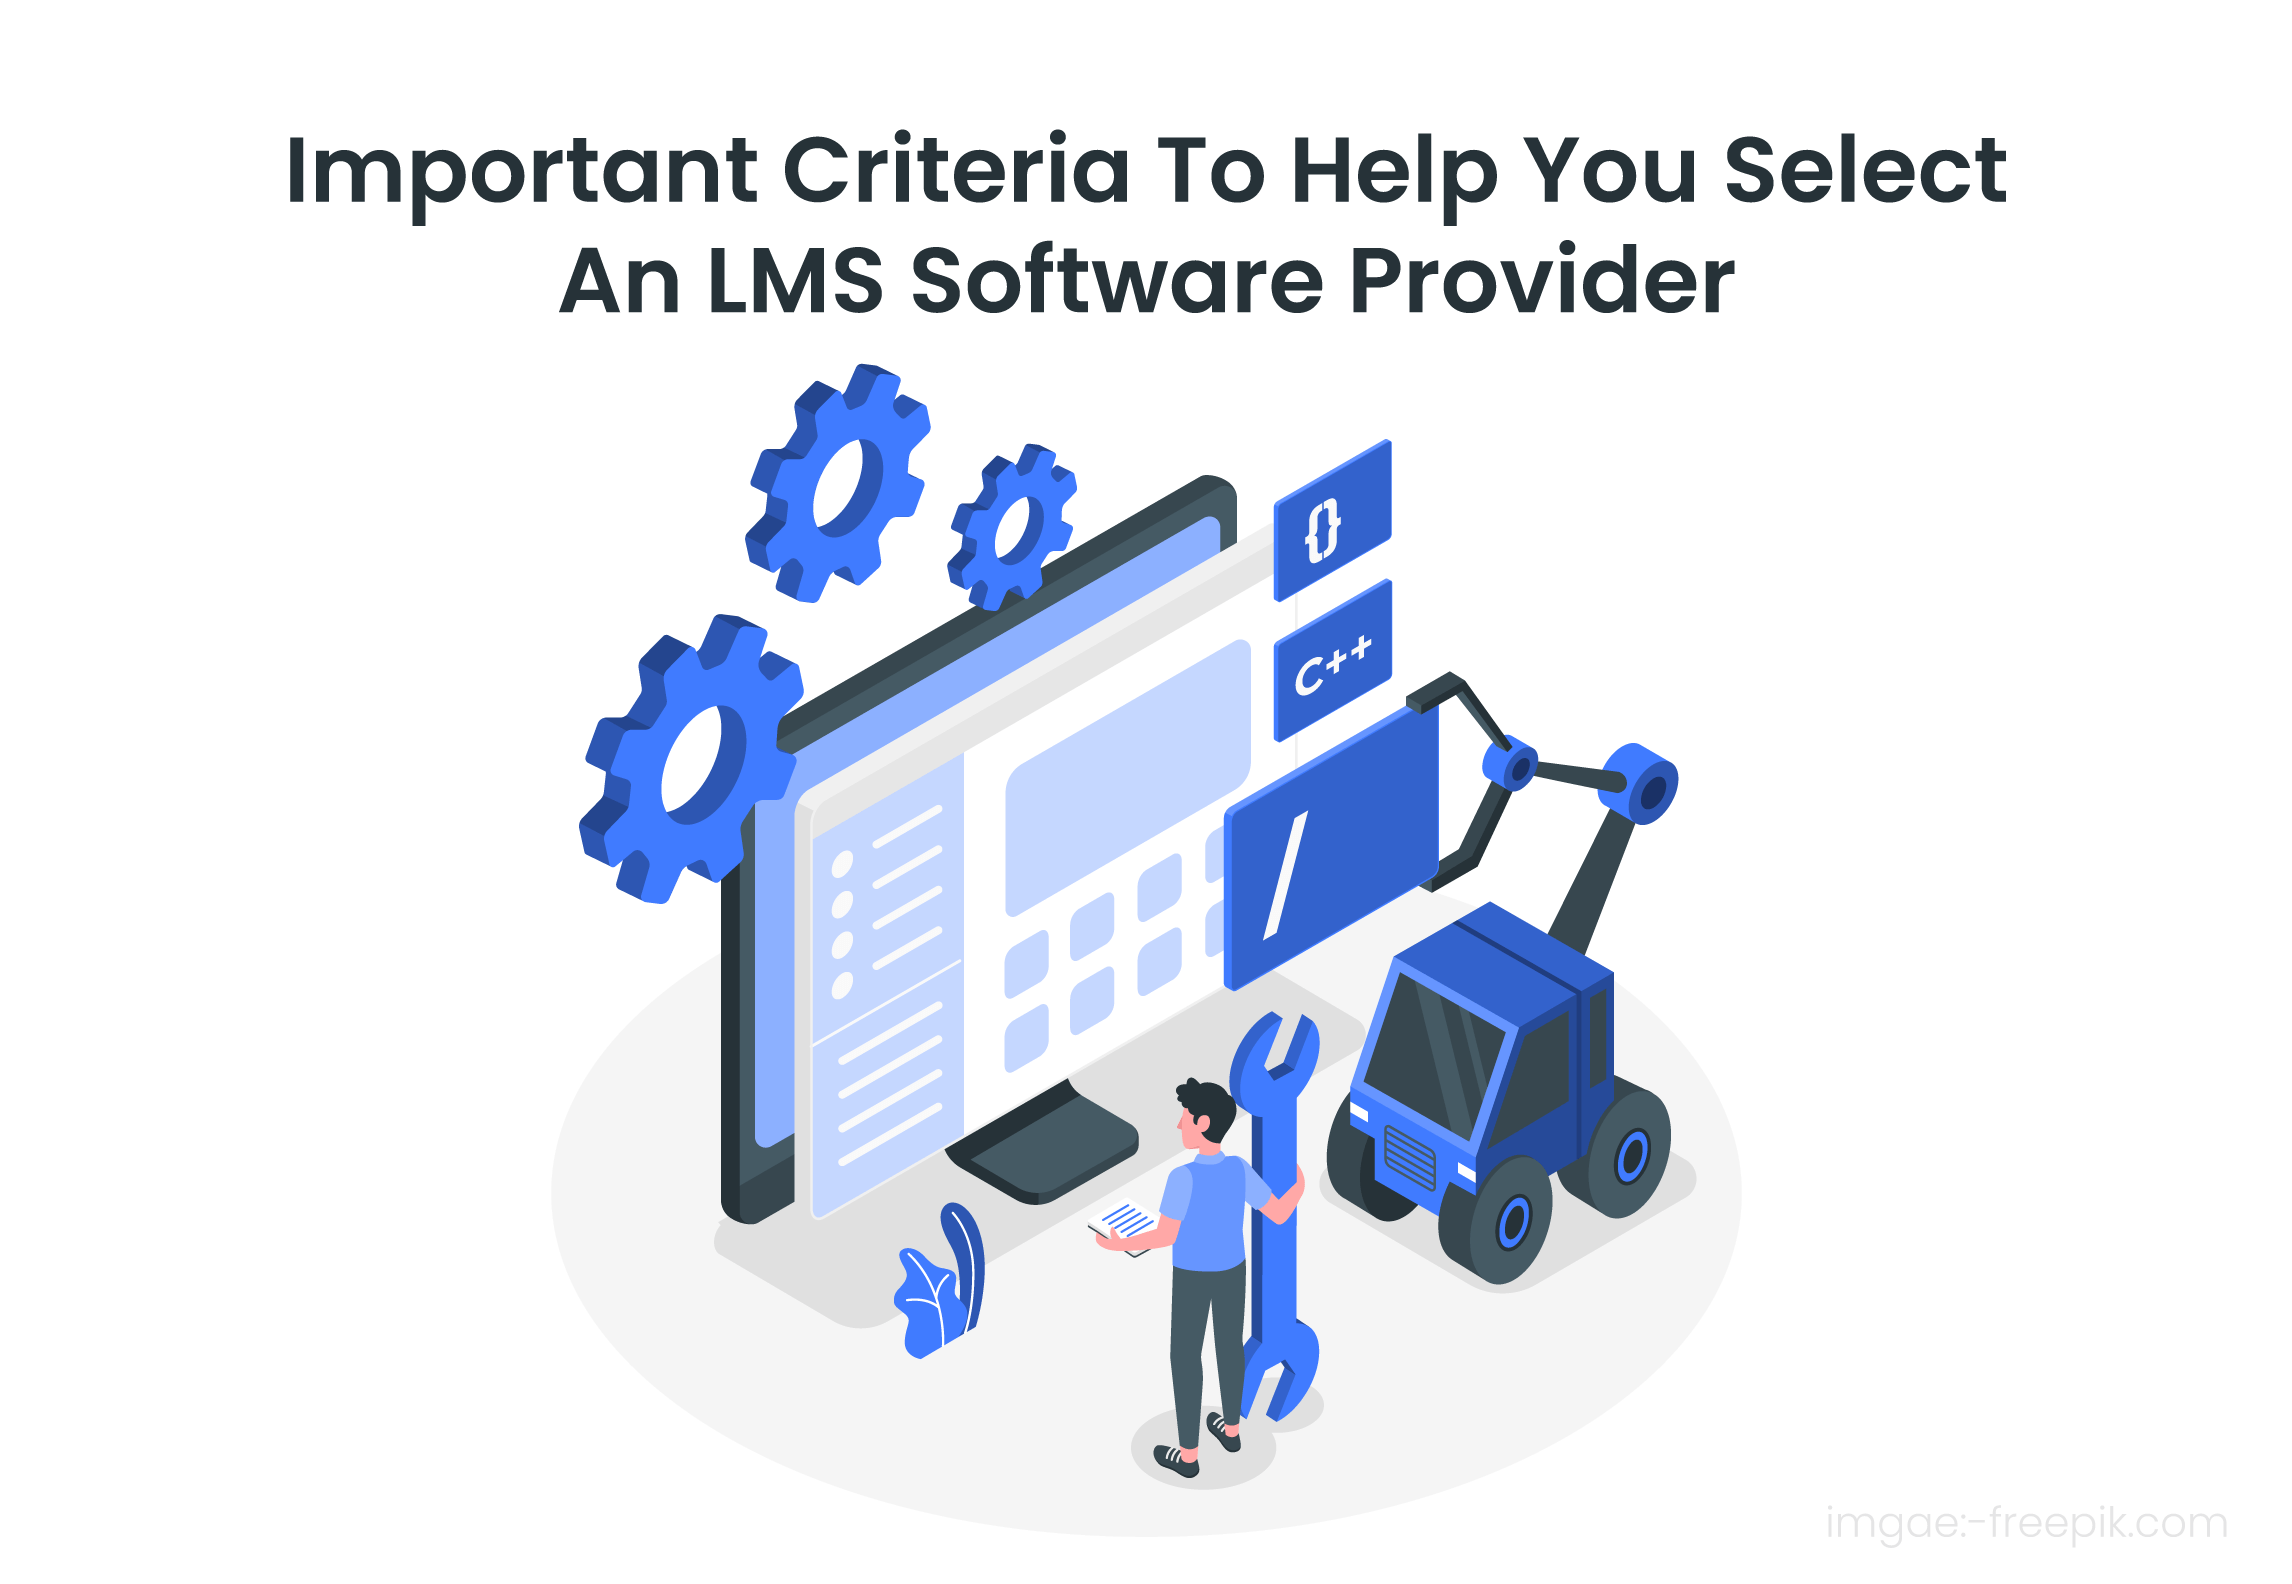 8 Questions to Consider When Choosing a LMS Provider